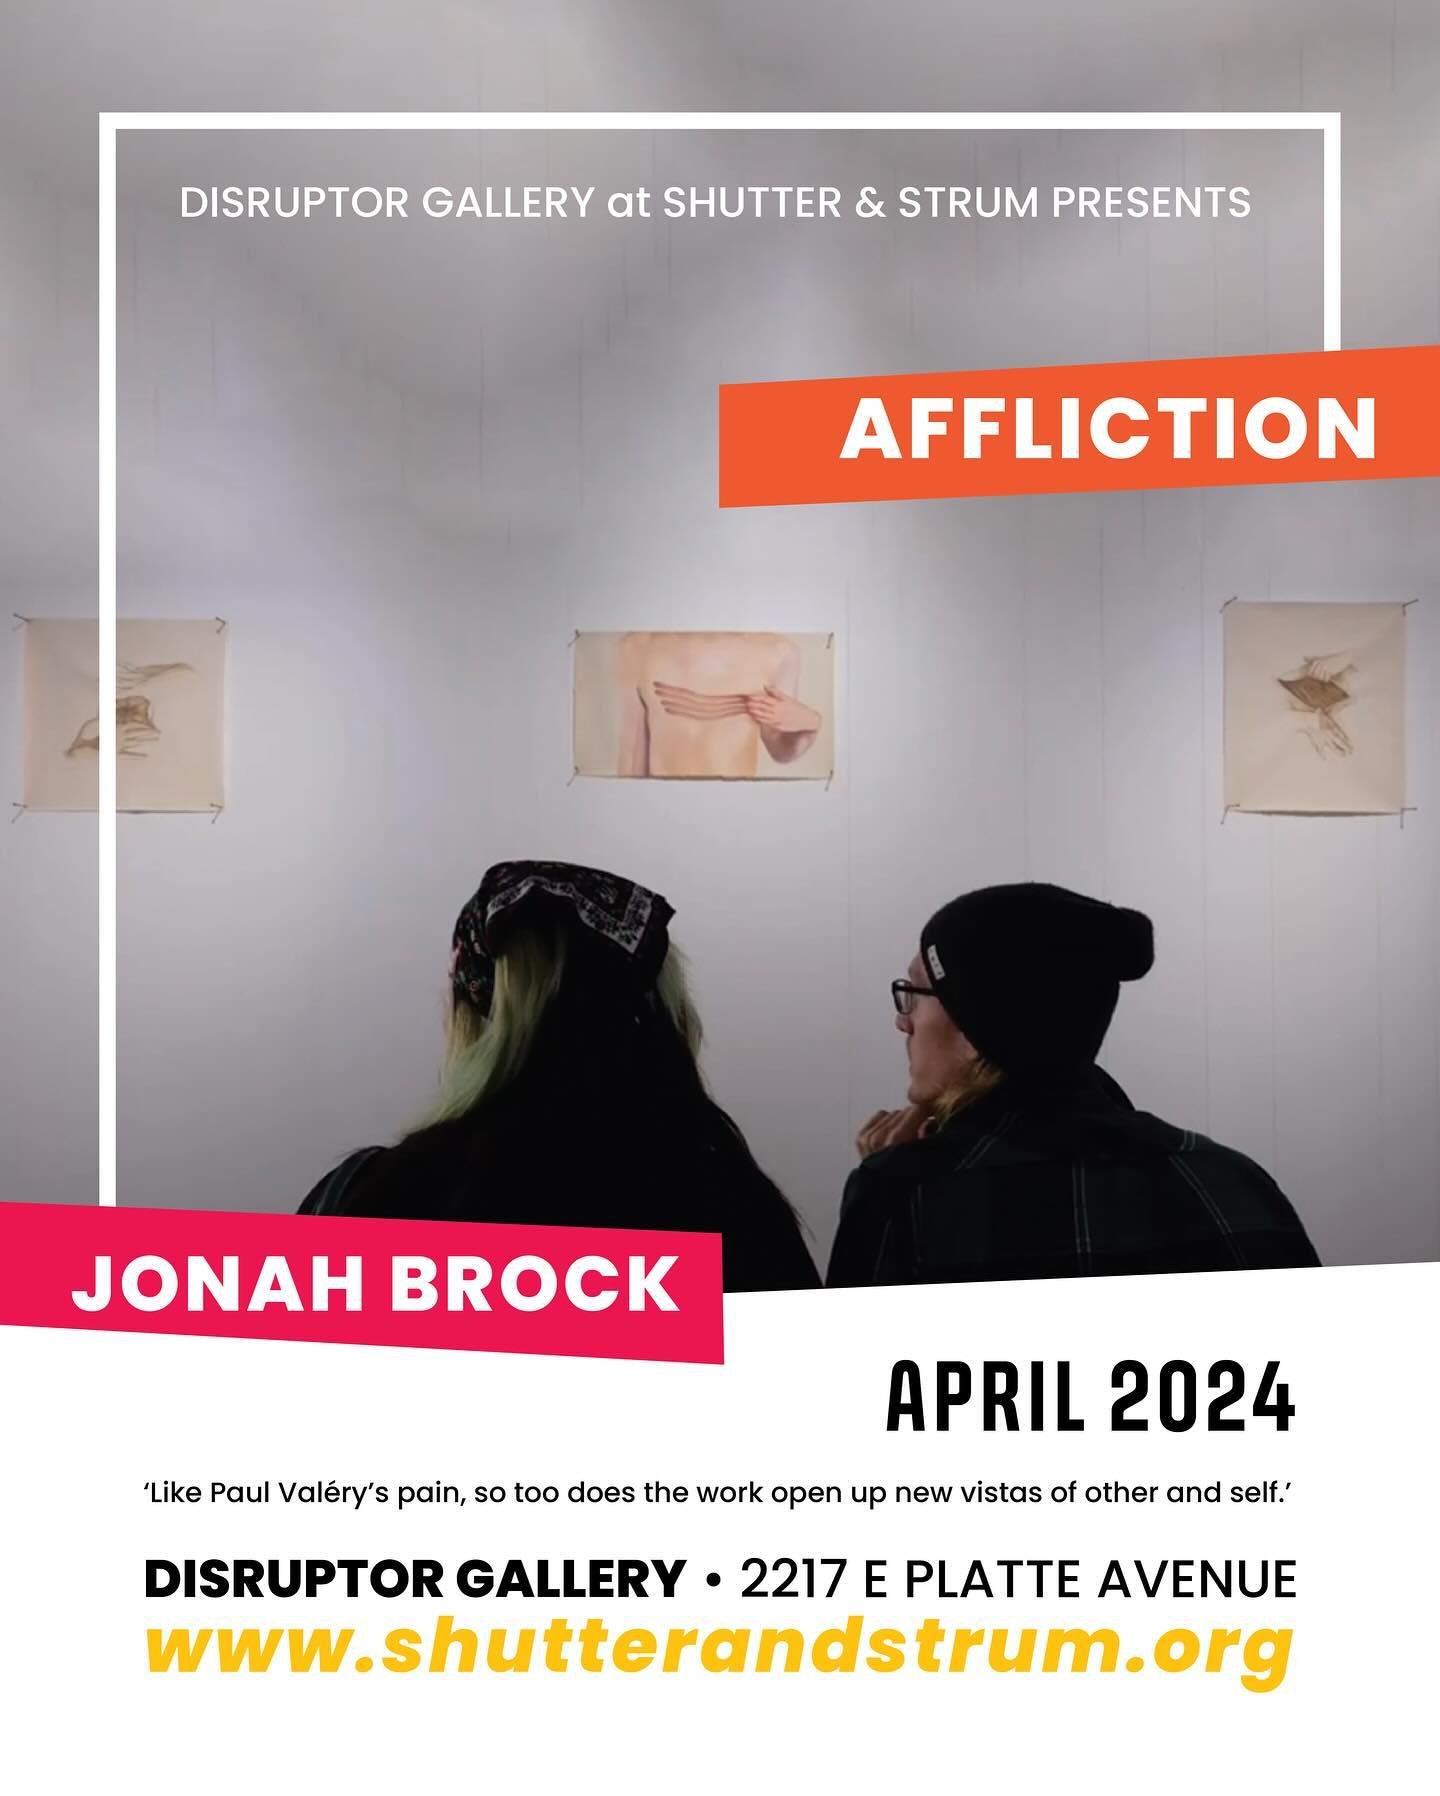 Tomorrow is the last chance to see the wonderful works by our featured artist for April @jonahbrock.art ! We are open 11-4
#supportlocalartists #supportcommunity